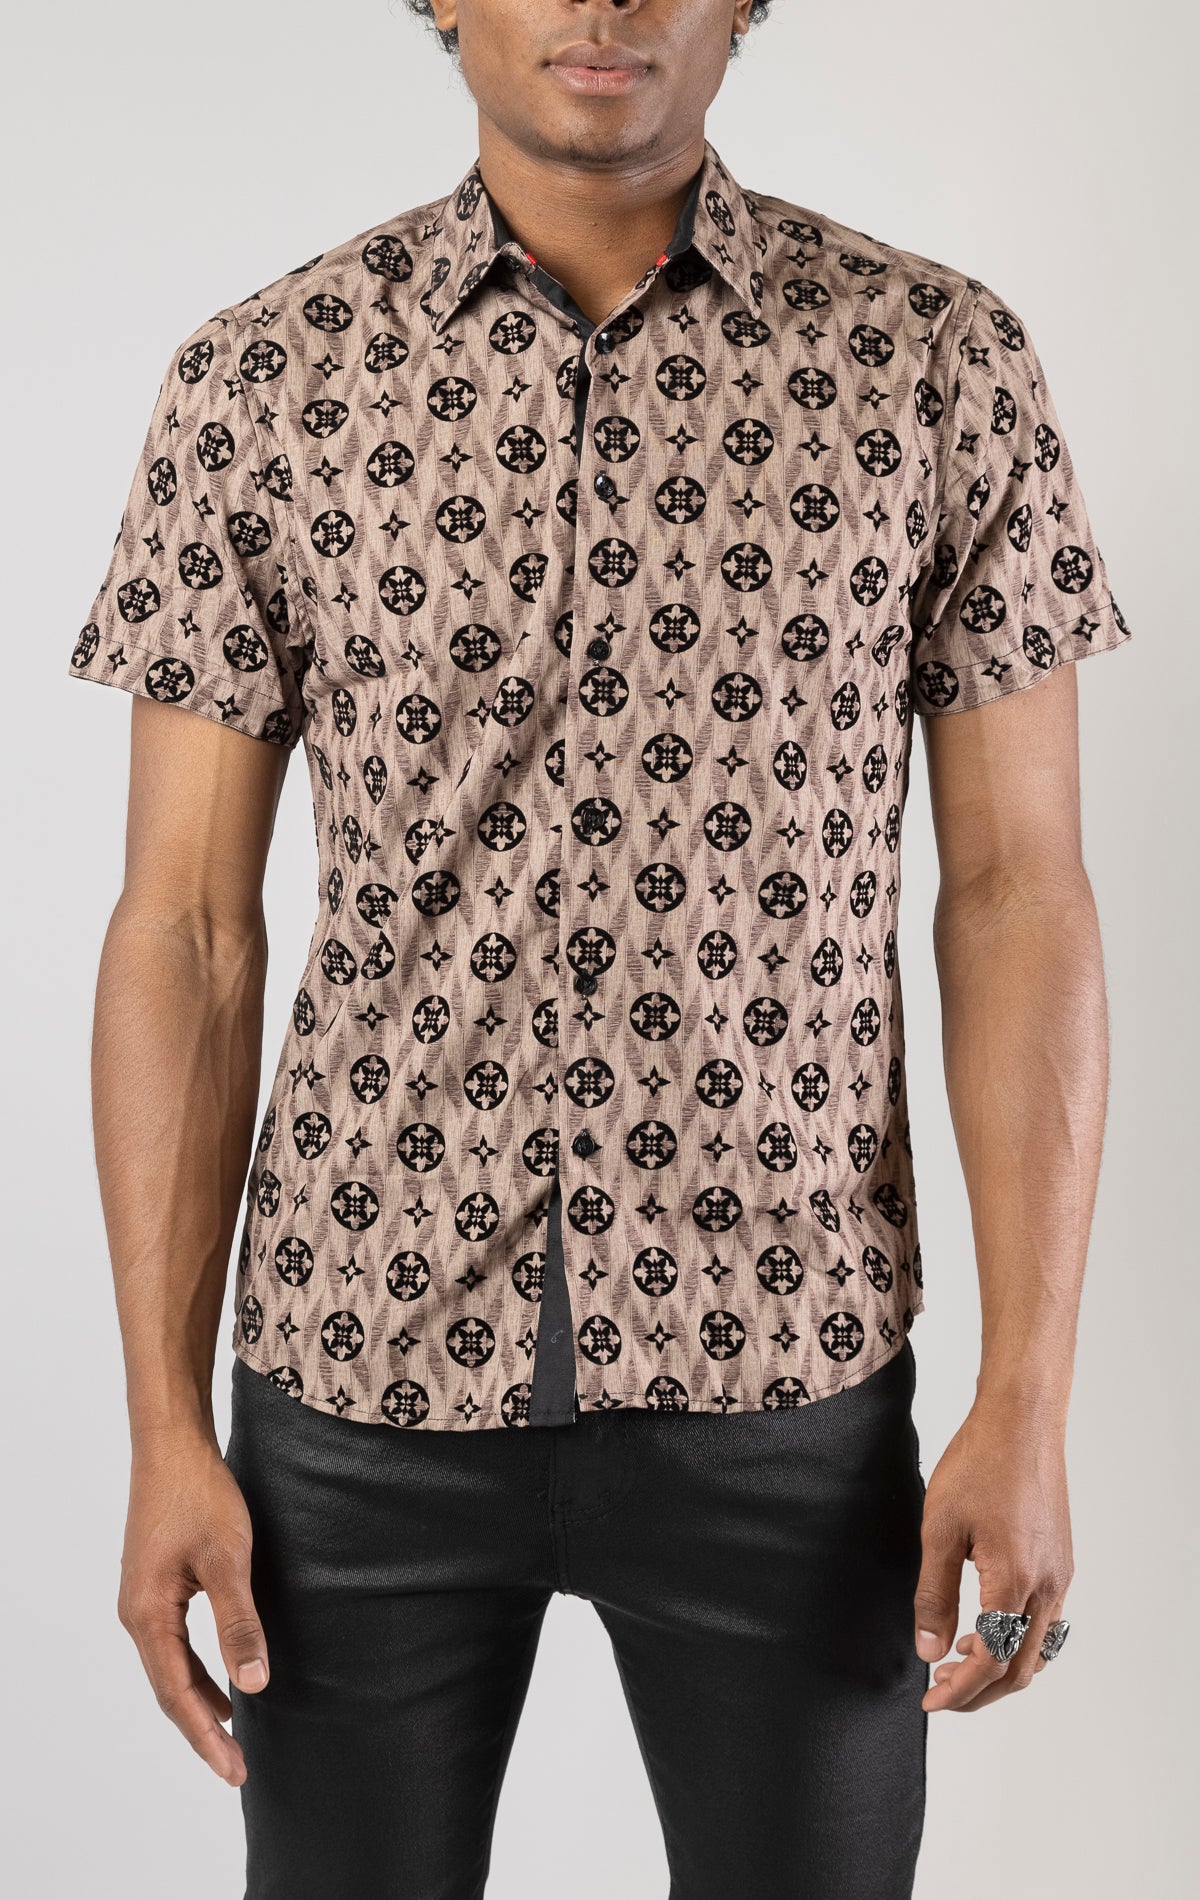 brown Men's casual, relaxed-fit button-down shirt with a short sleeve design. The shirt features an all-over Greek key pattern and a front button closure.